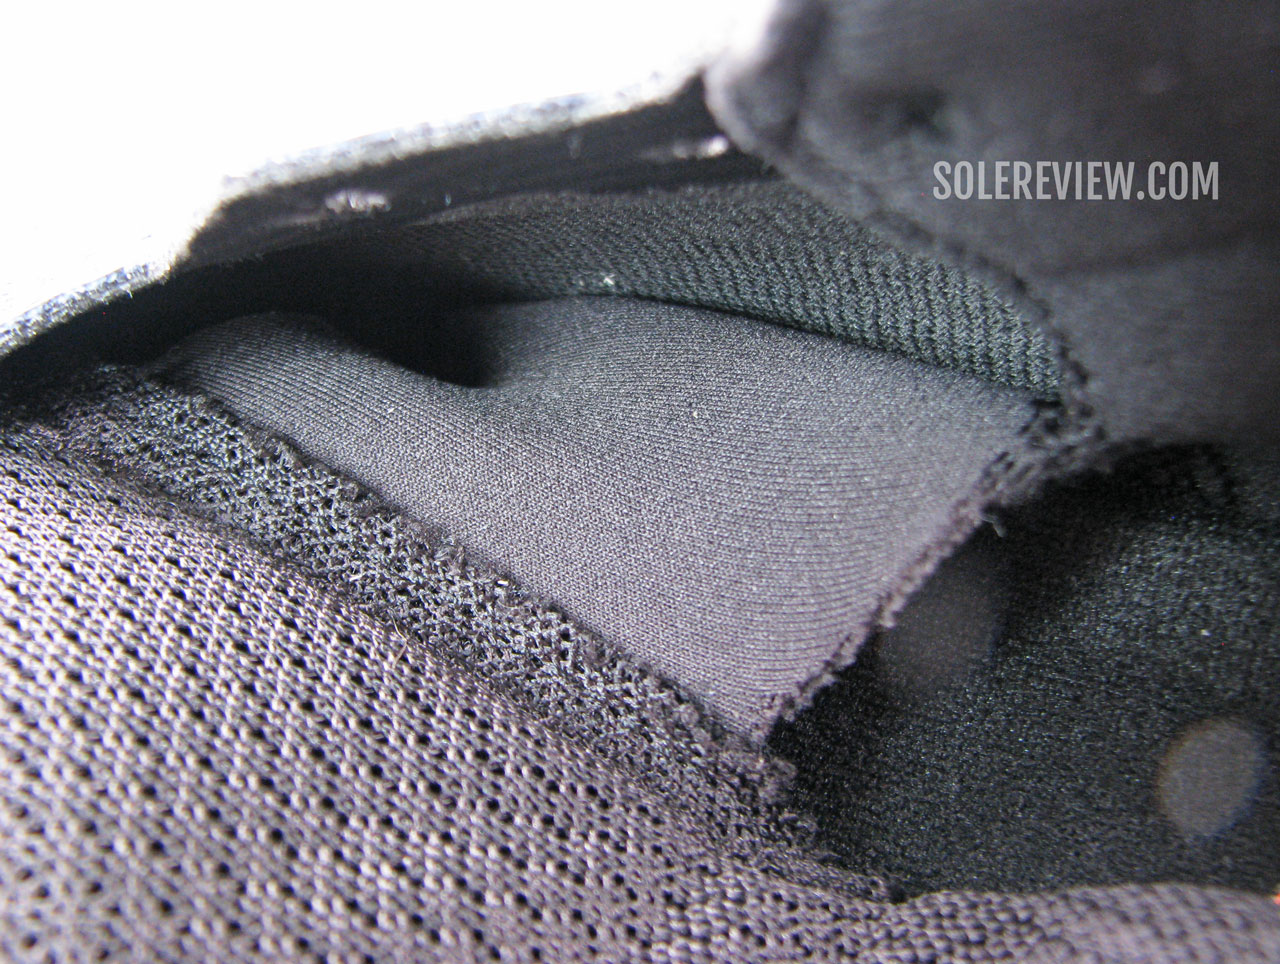 The inner tongue sleeve or gusset of the Asics Cumulus 24.